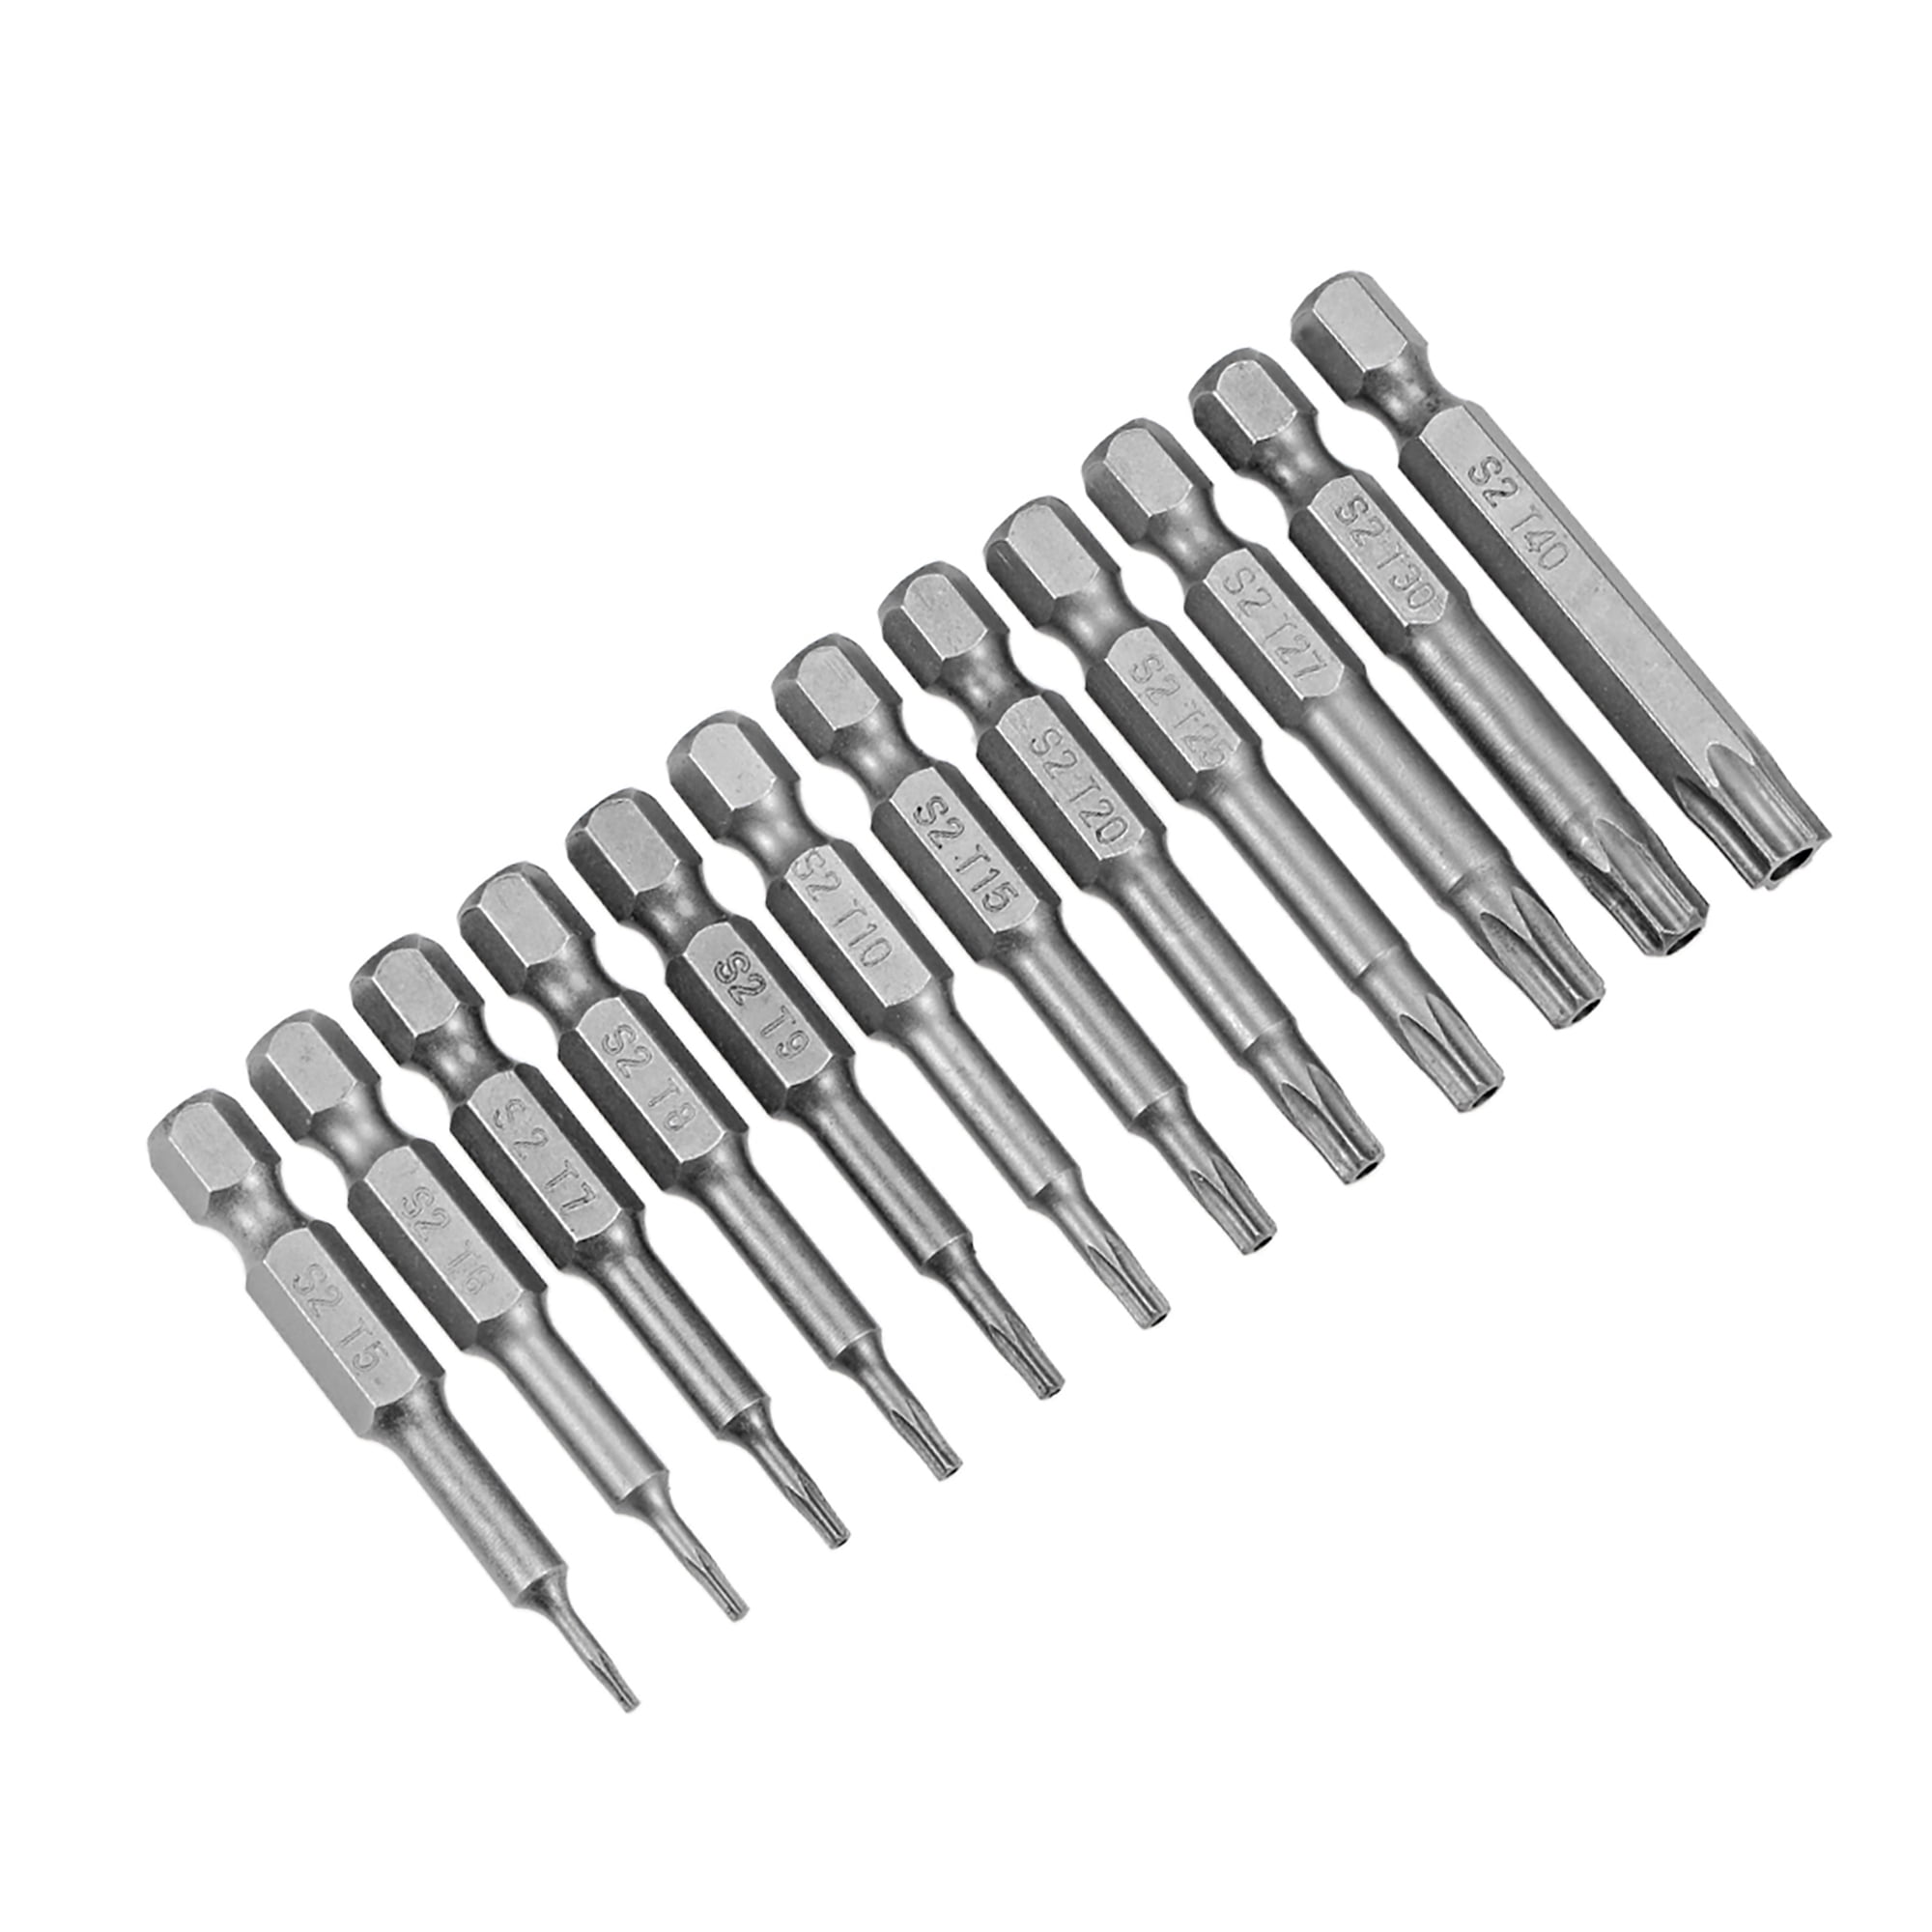 uxcell 10Pcs 1/4 Hex Shank 50mm Length Magnetic Hex Head H1.5 Screwdriver Bits S2 Alloy Steel 